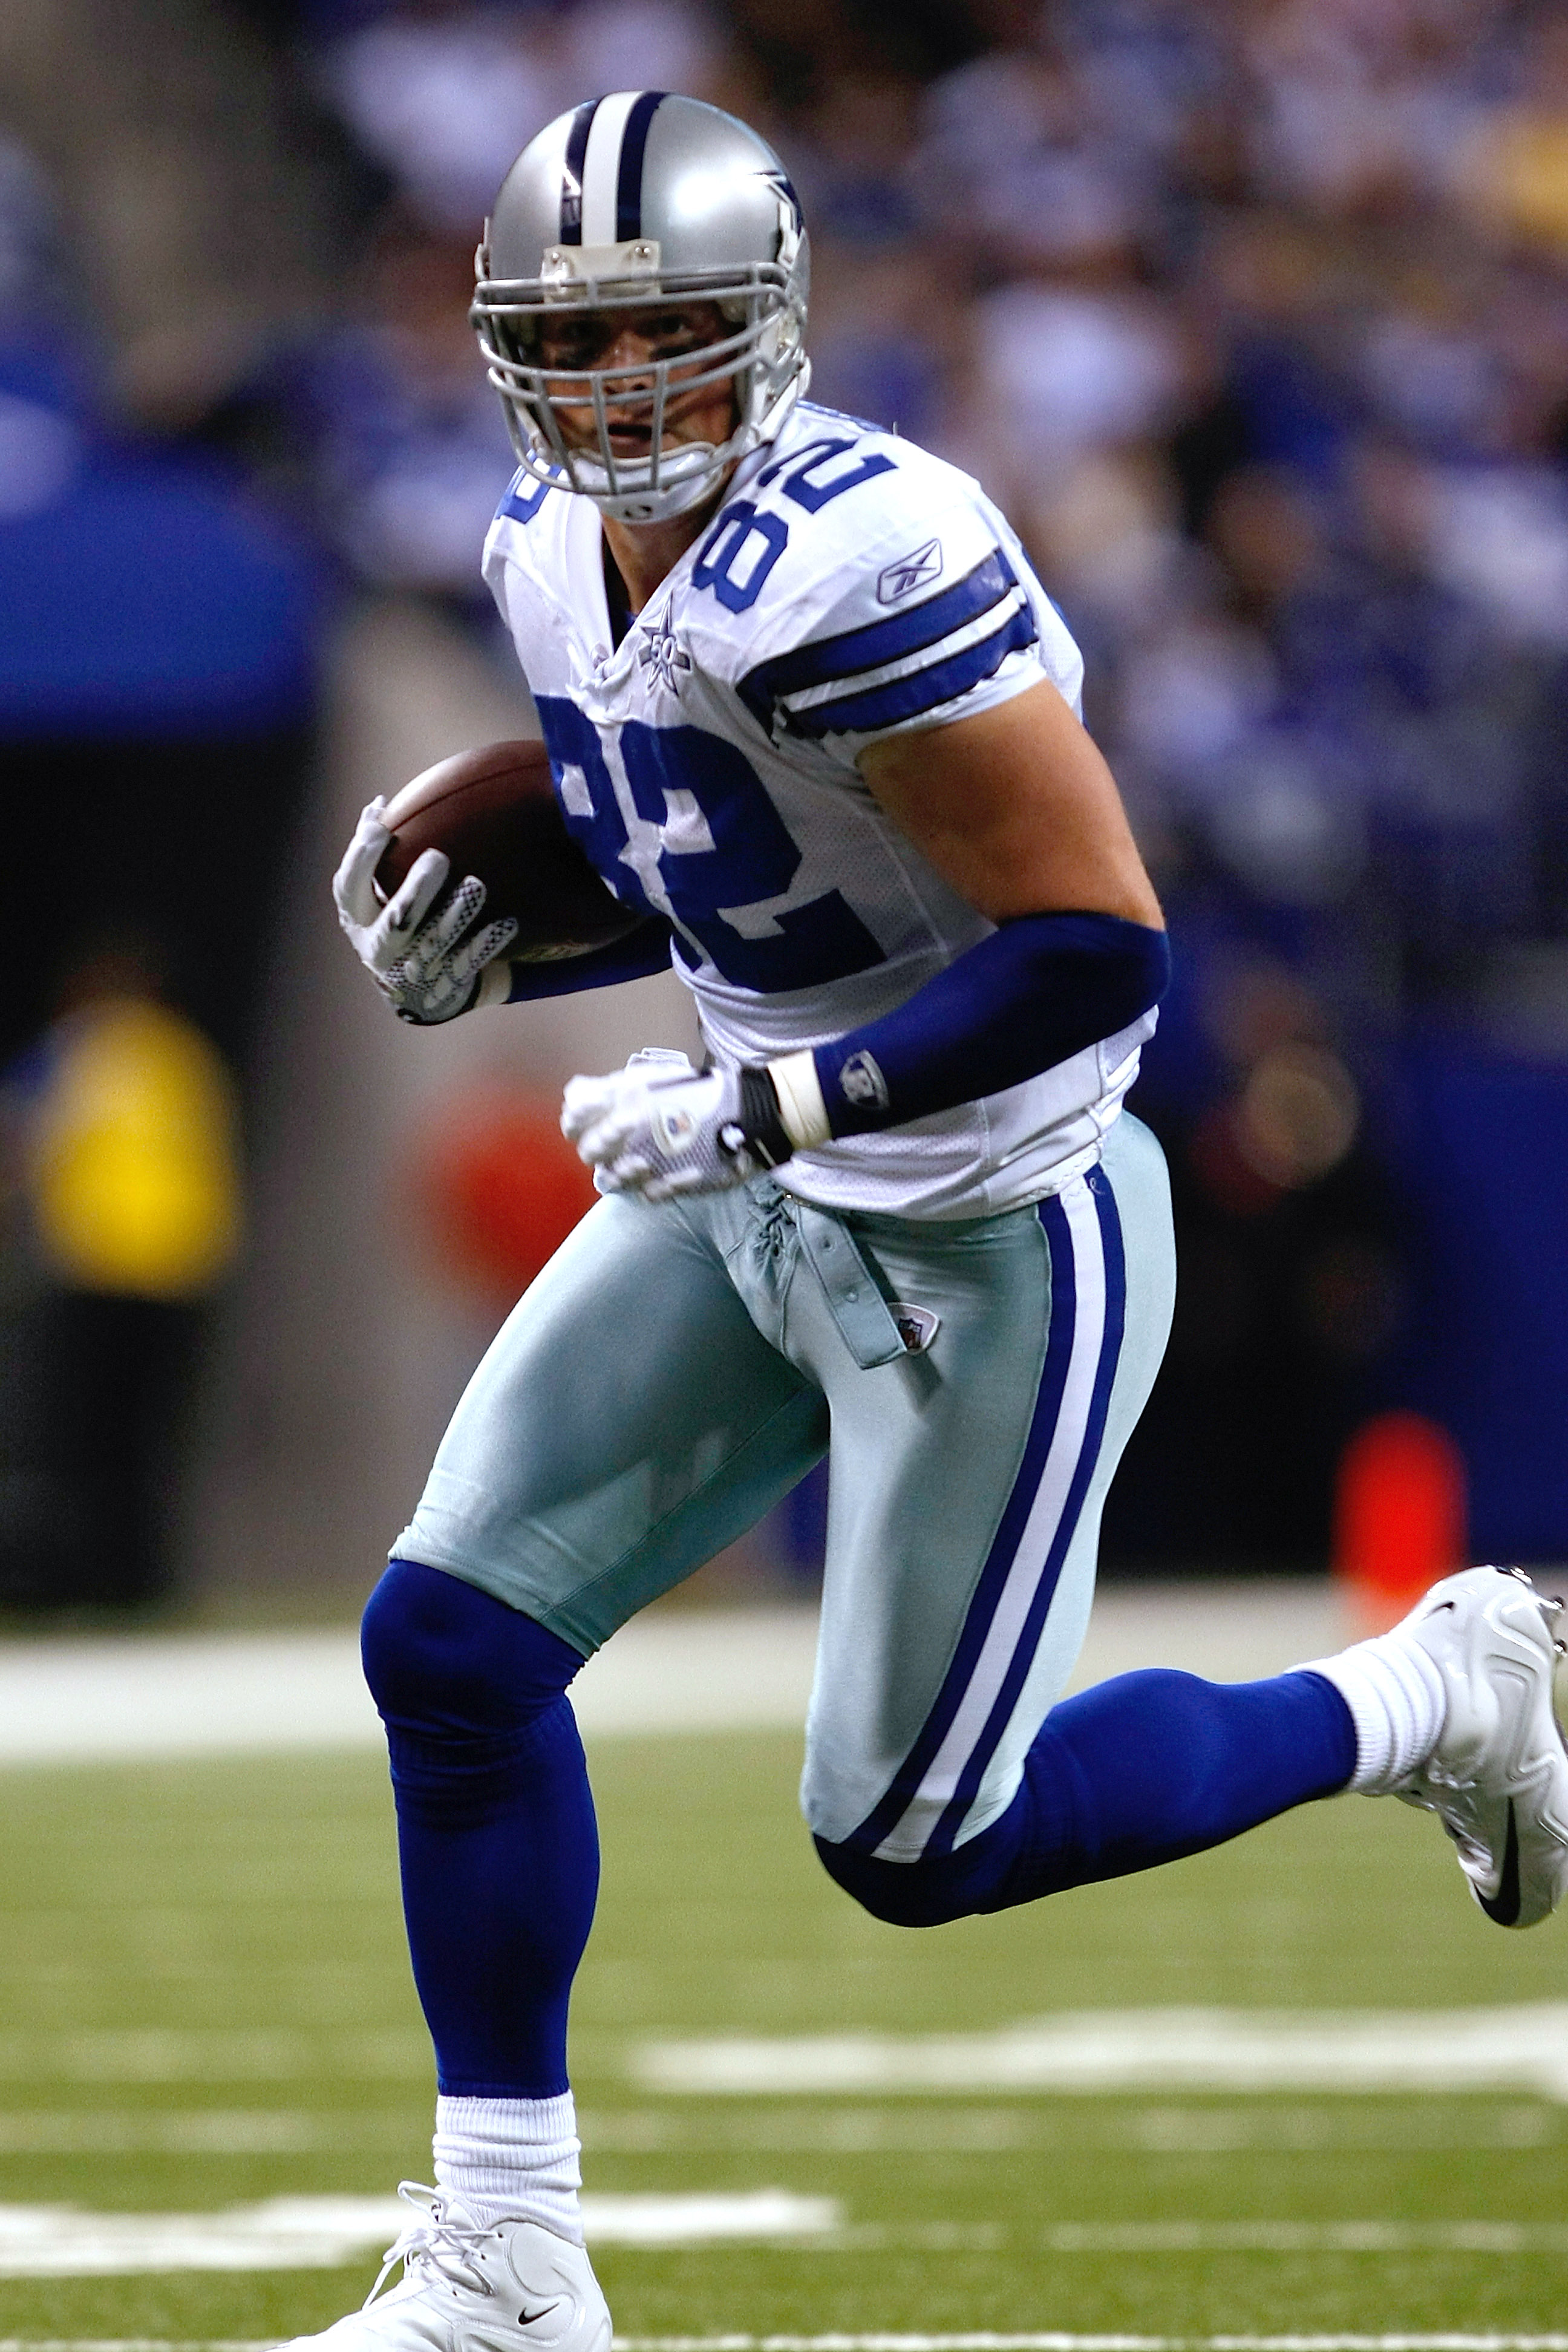 INDIANAPOLIS, IN - DECEMBER 05: Jason Witten #82 of the Dallas Cowboys runs against the Indianapolis Colts at Lucas Oil Stadium on December 5, 2010 in Indianapolis, Indiana. The Cowboys defeated the Colts 38-35 in overtime. (Photo by Scott Boehm/Getty Ima